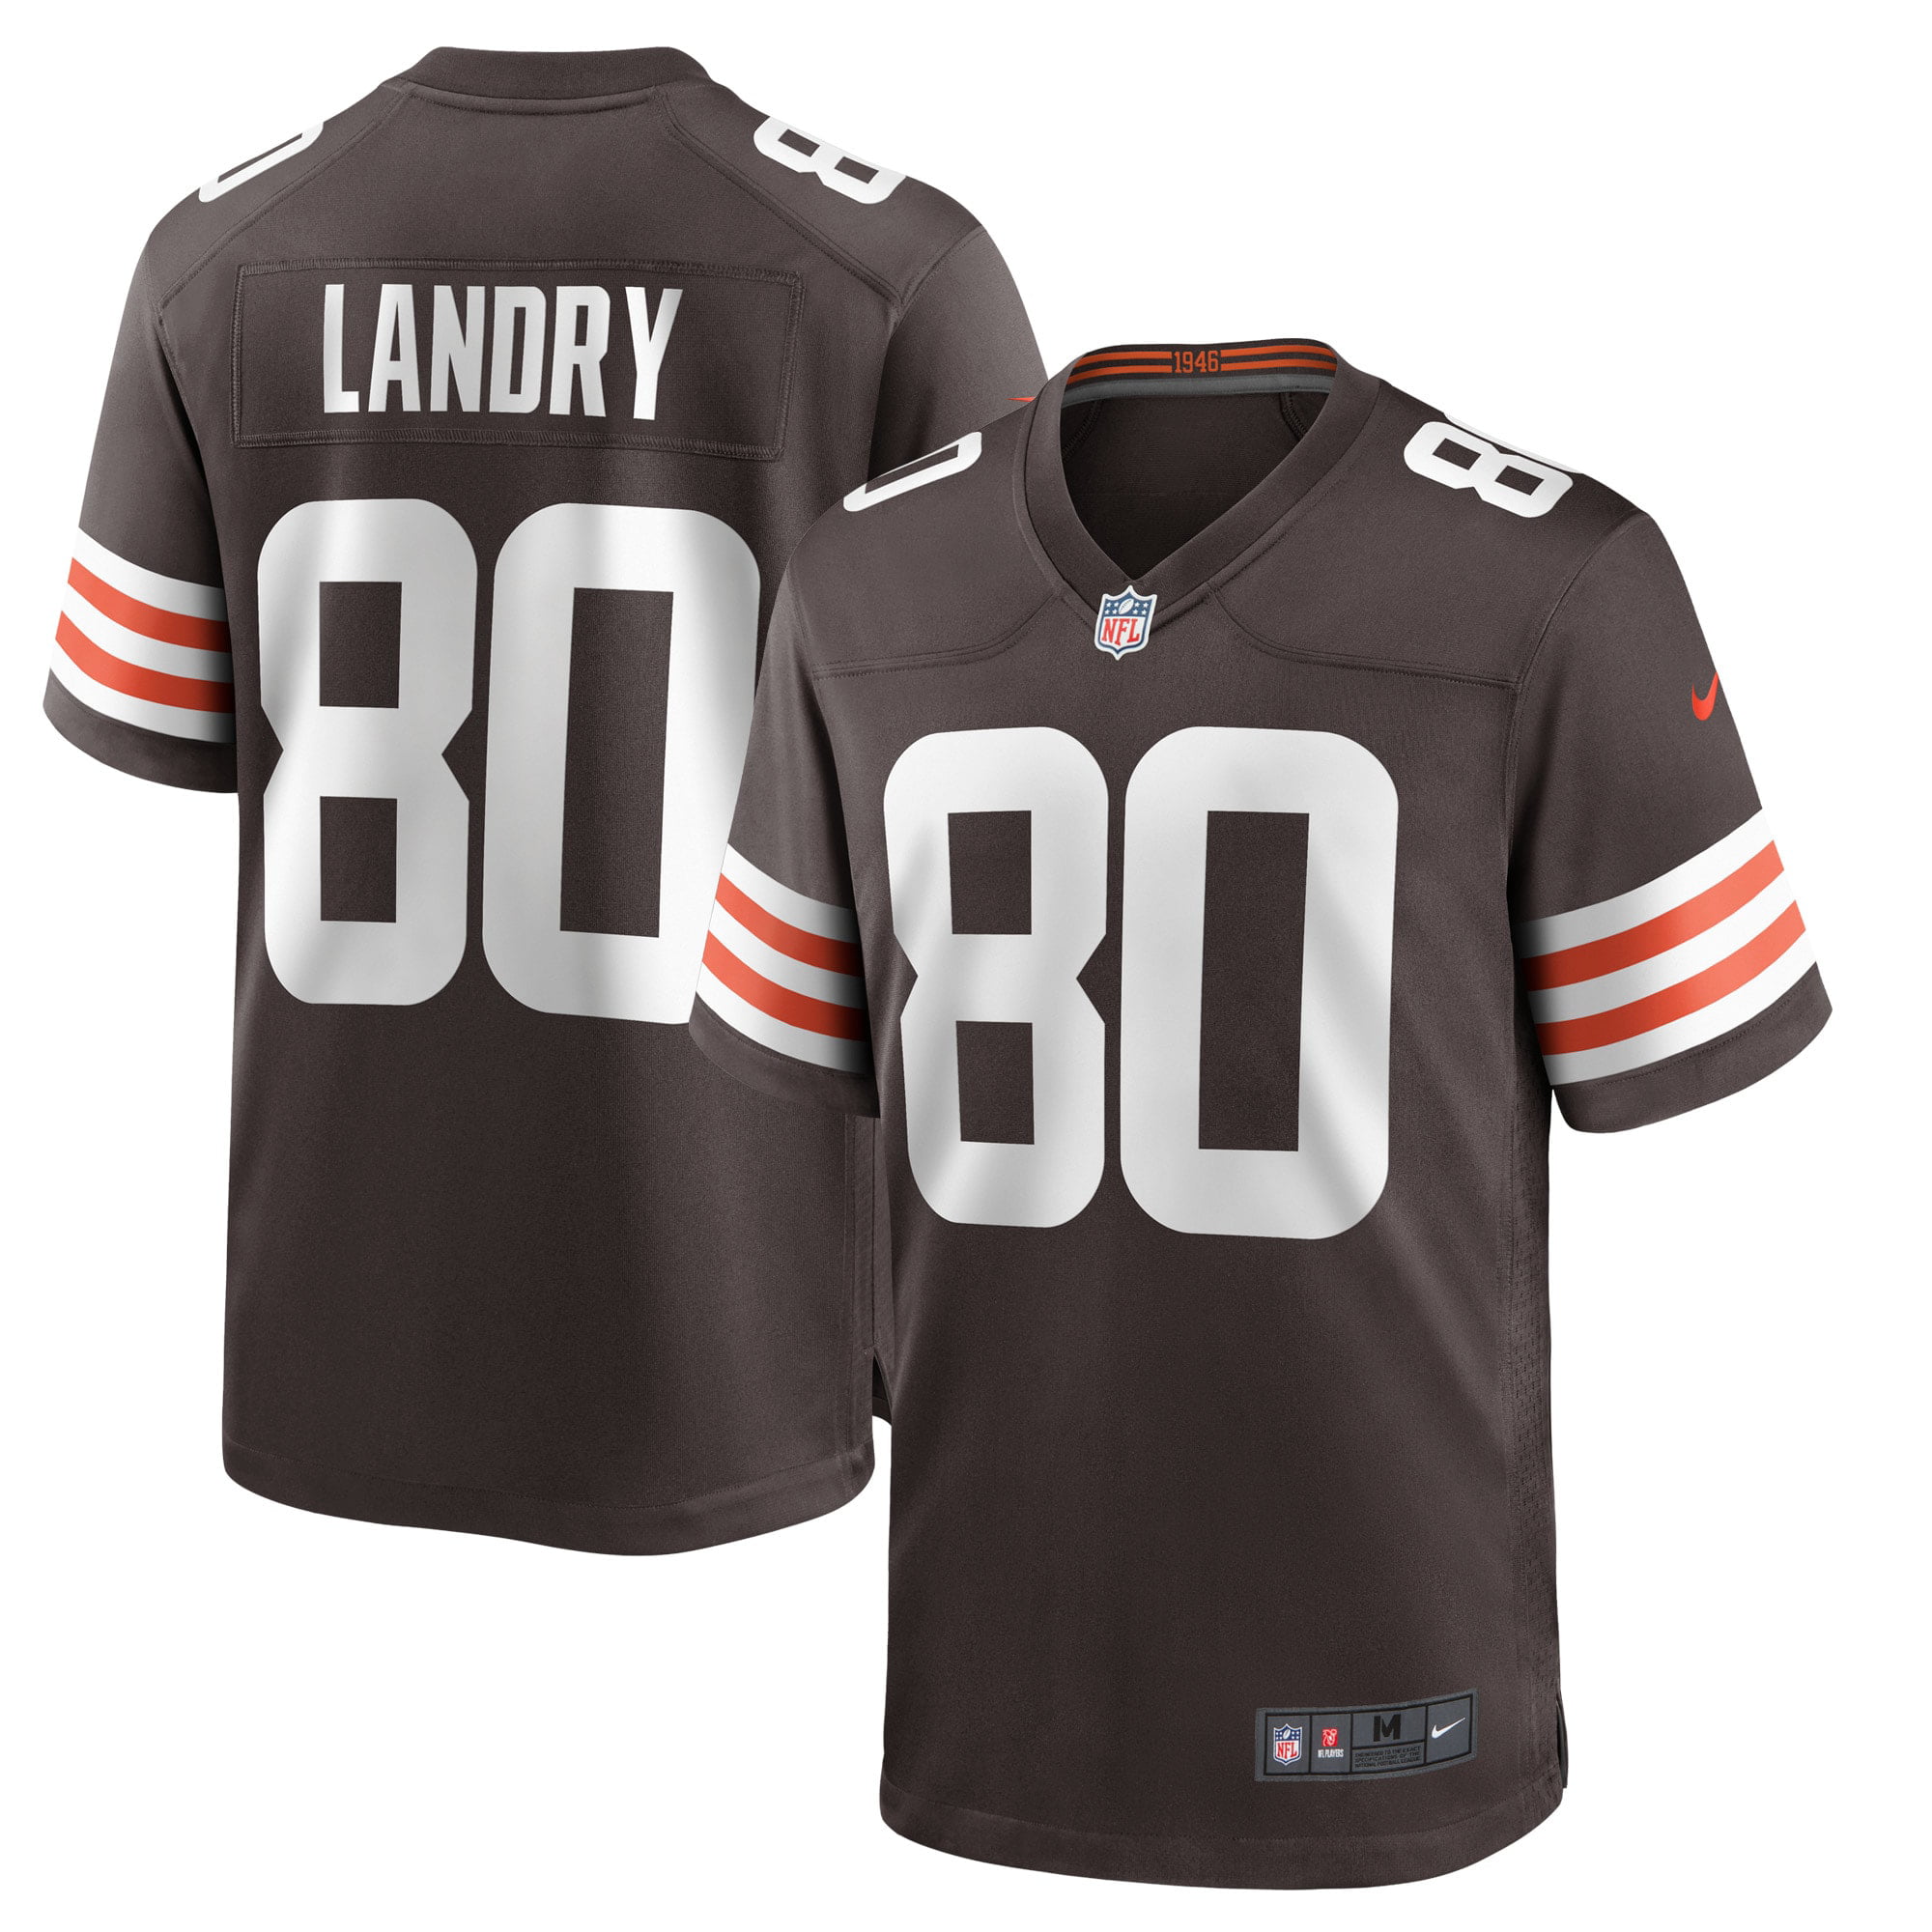 jarvis landry college jersey